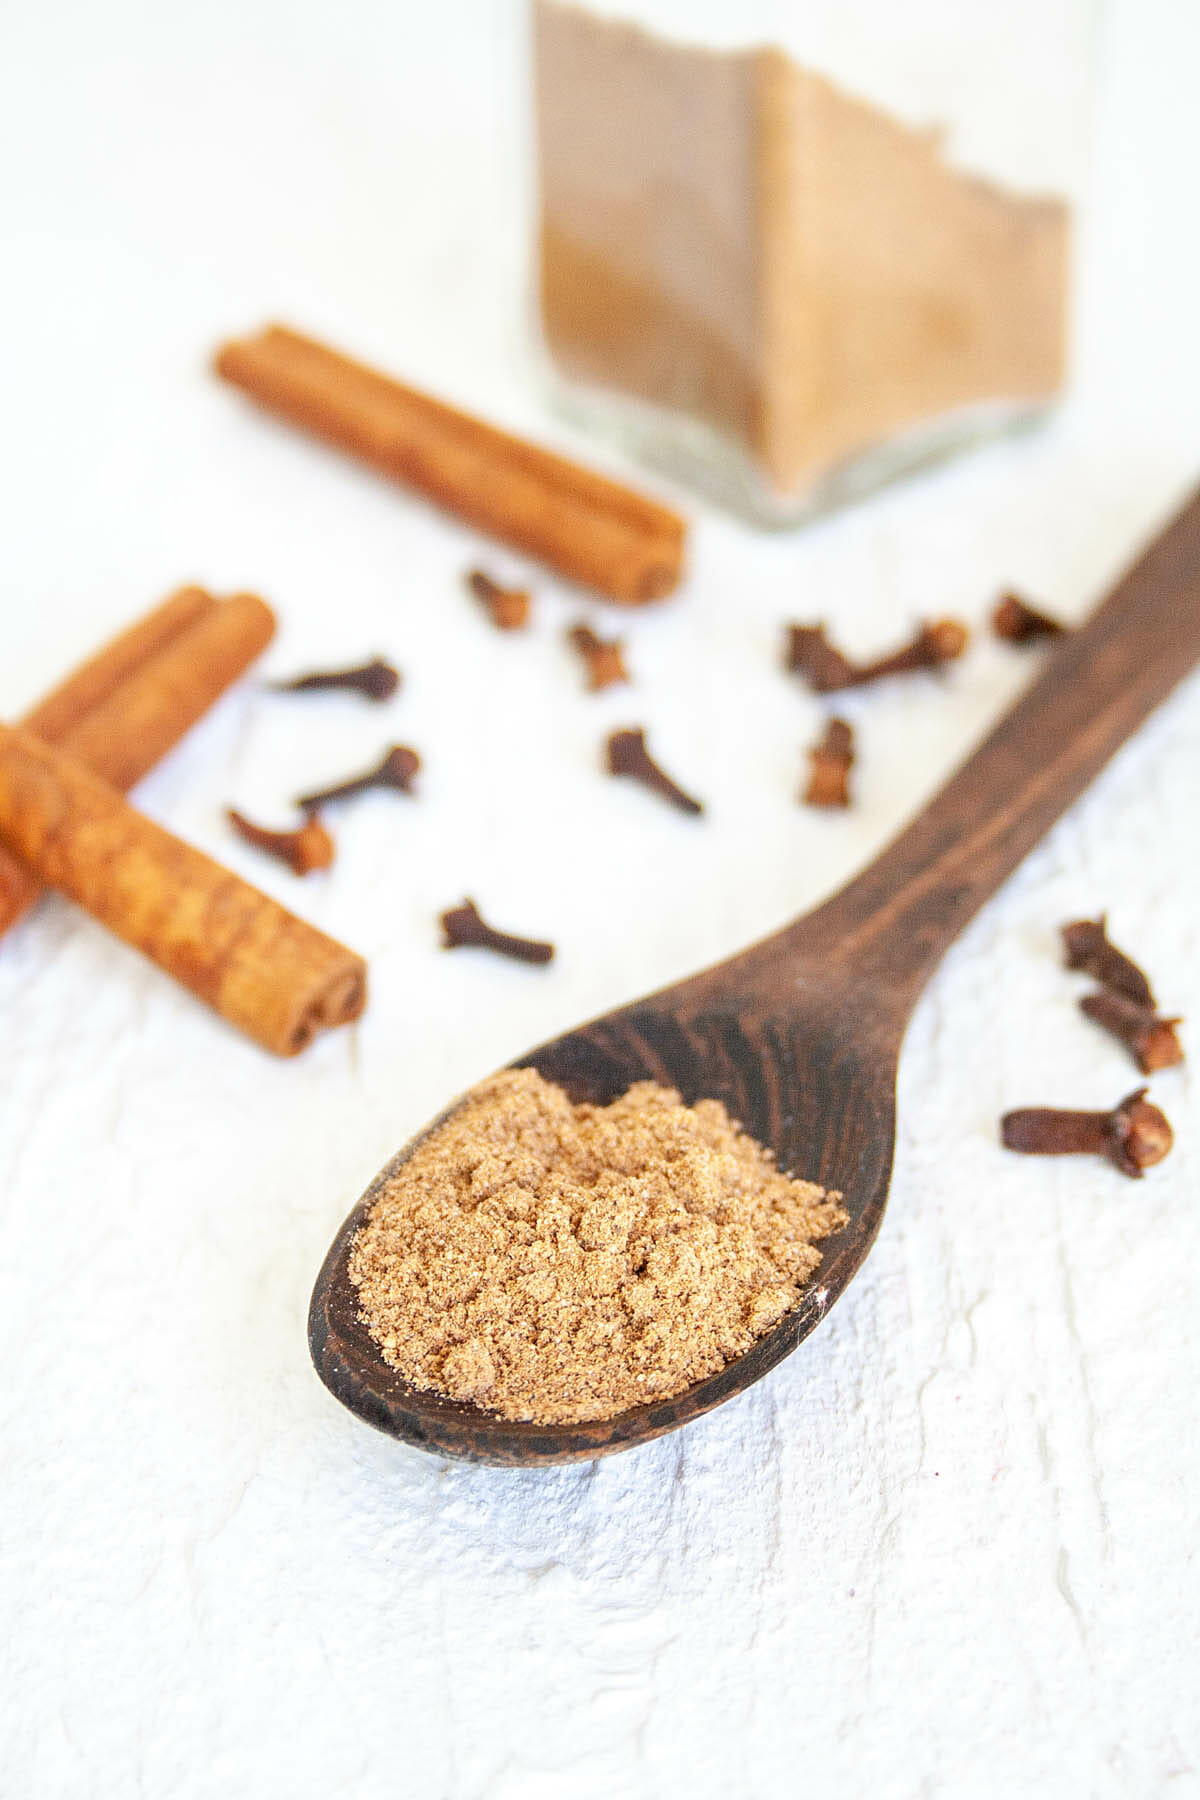 Spoonful of Chai Spice Mix with cinnamon sticks and cloves.